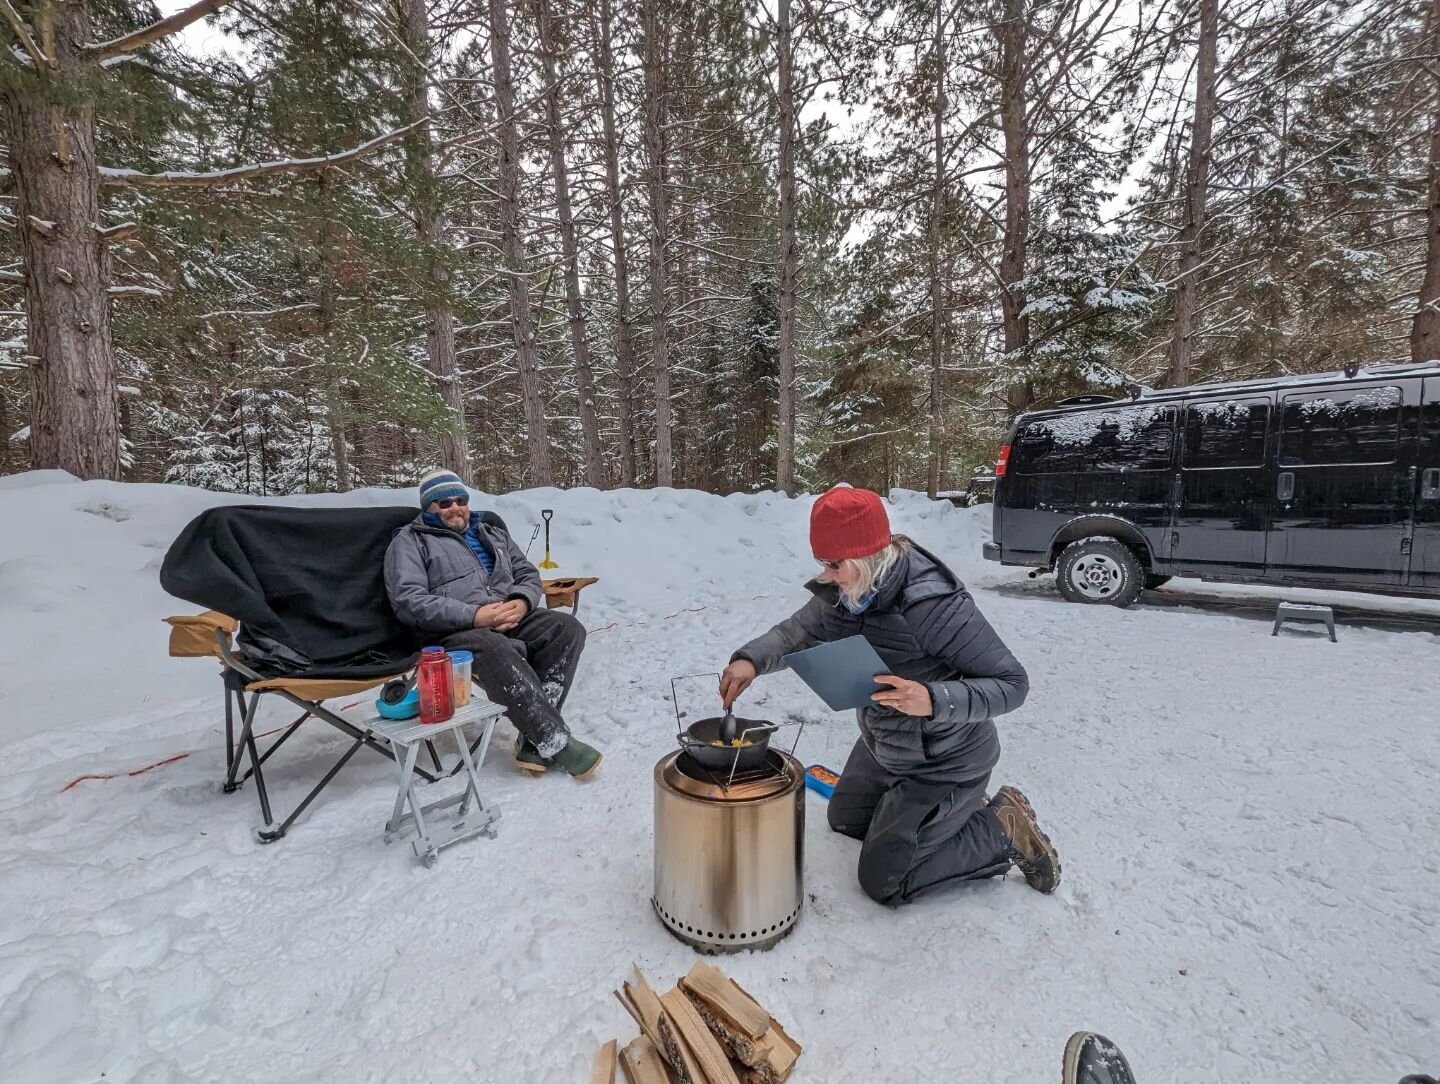 We've been called weird for our love of winter adVANtures. It's such a joy that we get to work with other weirdos who make the most of Winter. Cheers to all the adventures ahead!
.
.
.
#wintercamping #winterrving #offgridcamper #offgrid #skibums #low